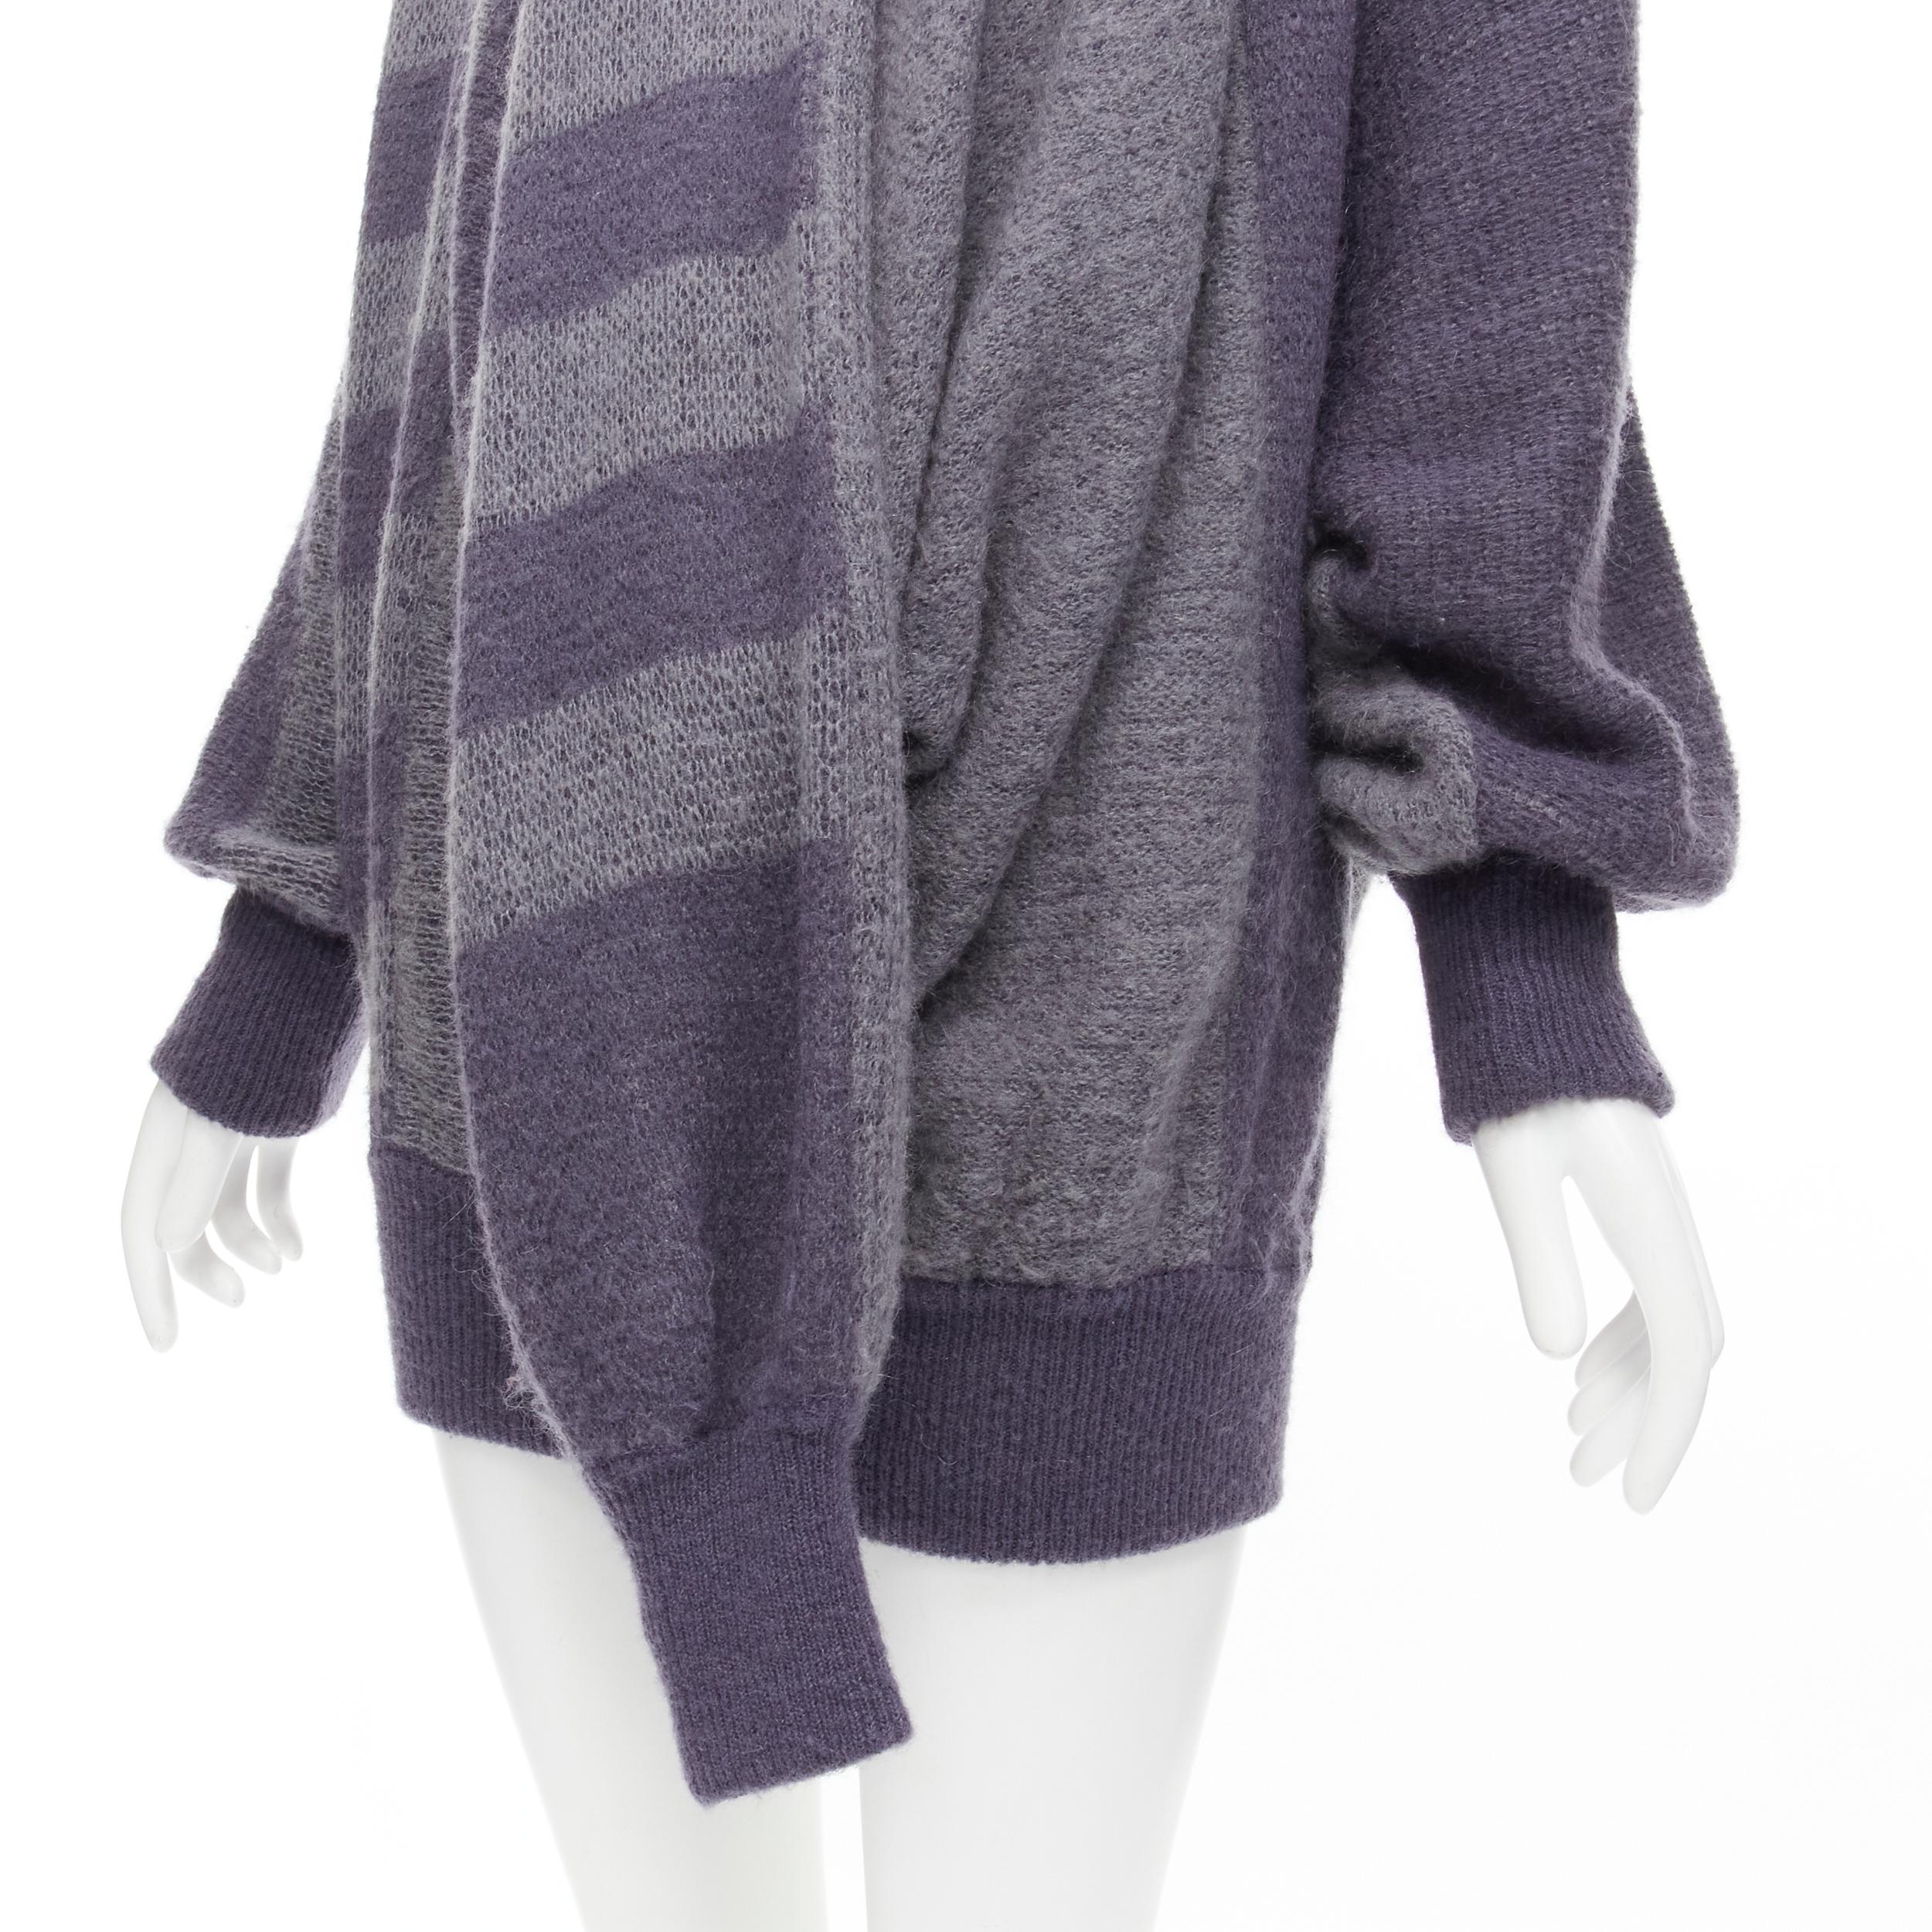 vintage ISSEY MIYAKE 1980s purple striped 3 sleeve draped turtleneck sweater dress M 
Reference: CRTI/A00521 
Brand: Issey Miyake 
Collection: 1980s 
Material: Wool 
Color: Purple 
Pattern: Striped 
Extra Detail: Turtleneck. 3-sleeve design. 
Made